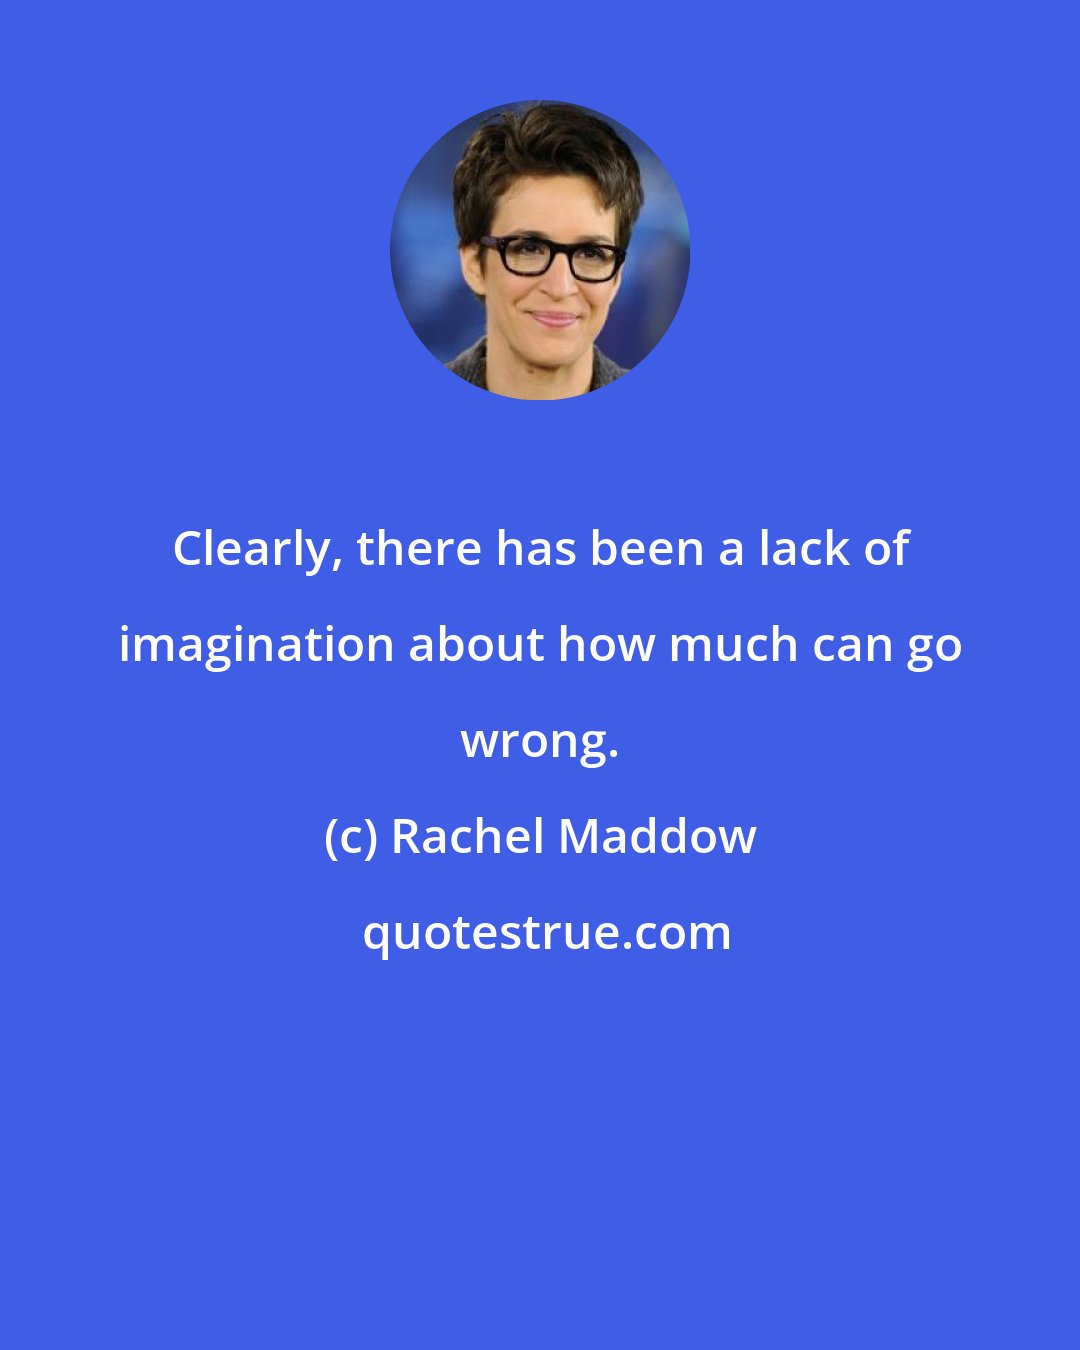 Rachel Maddow: Clearly, there has been a lack of imagination about how much can go wrong.